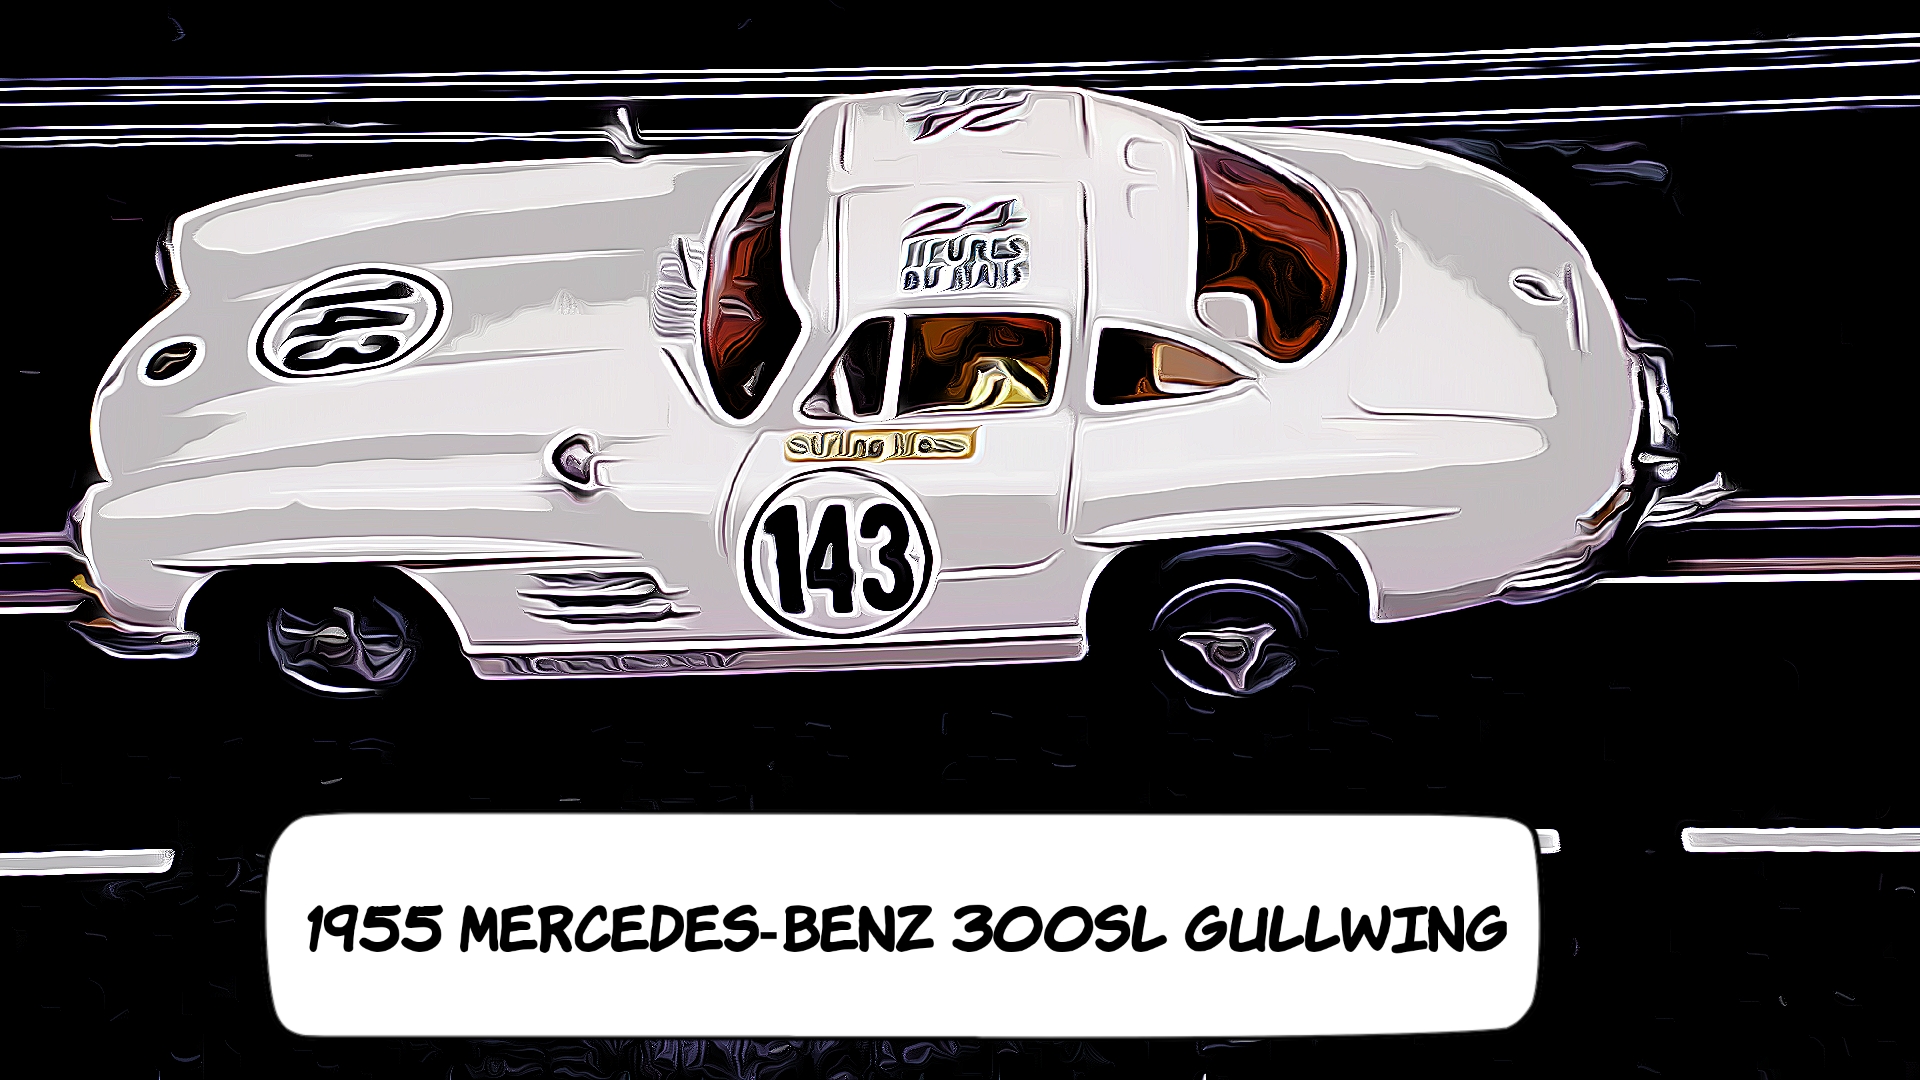 * SOLD * Bundle Deal for Yoshi M. ONLY * SALE * Vintage COX 1955 Mercedes-Benz 300SL Gullwing Slot Car 1:24 Scale - #143